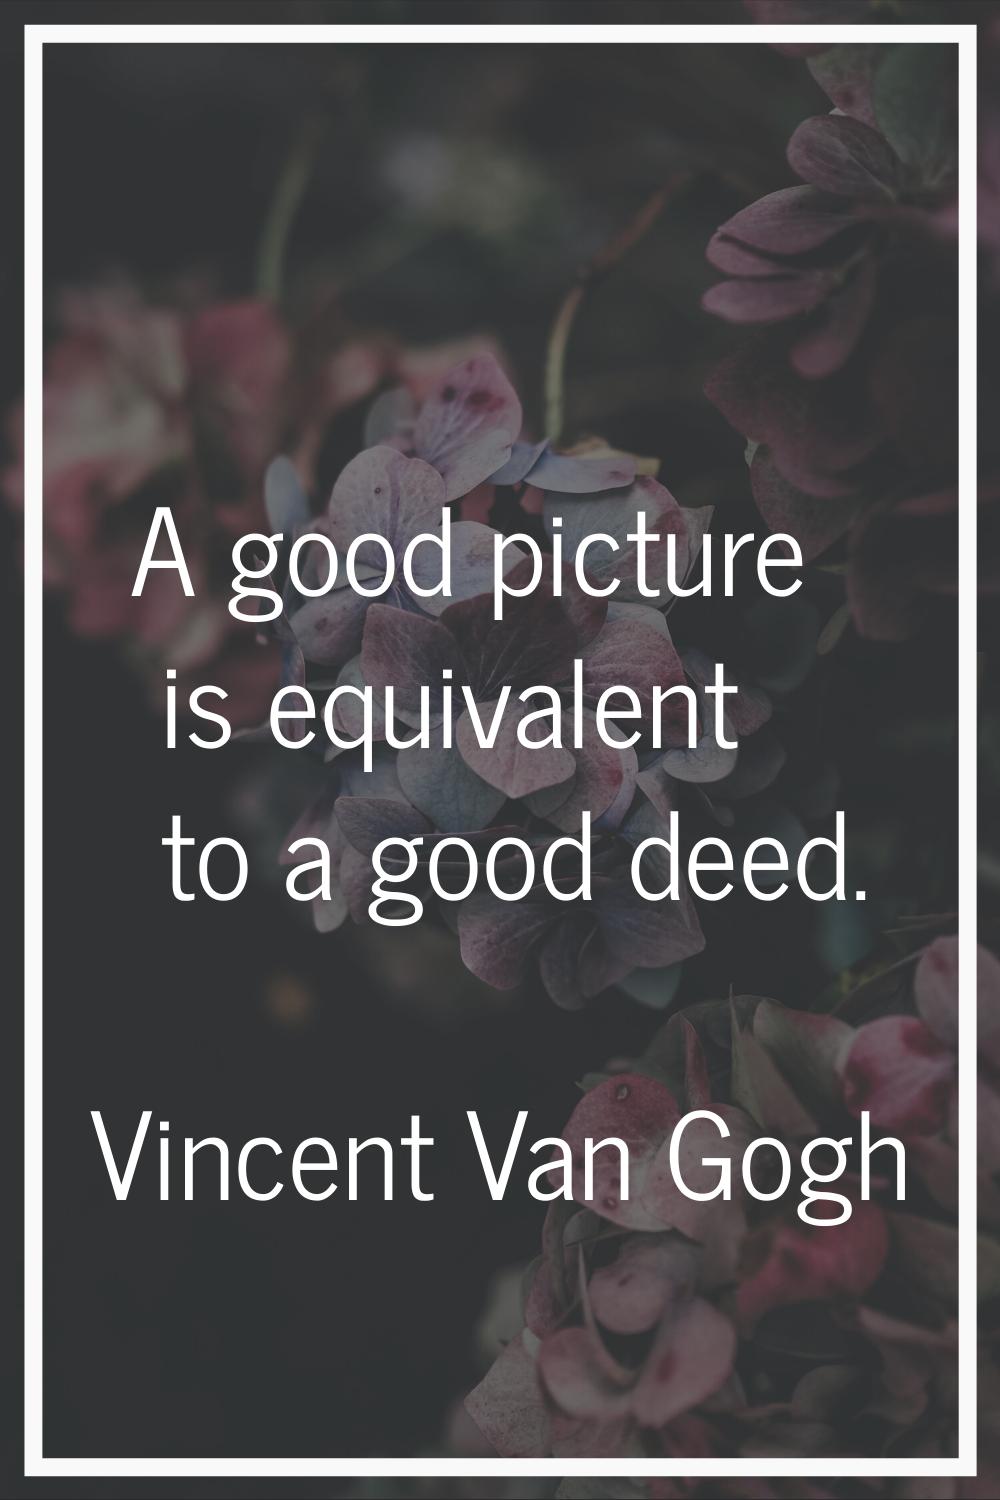 A good picture is equivalent to a good deed.